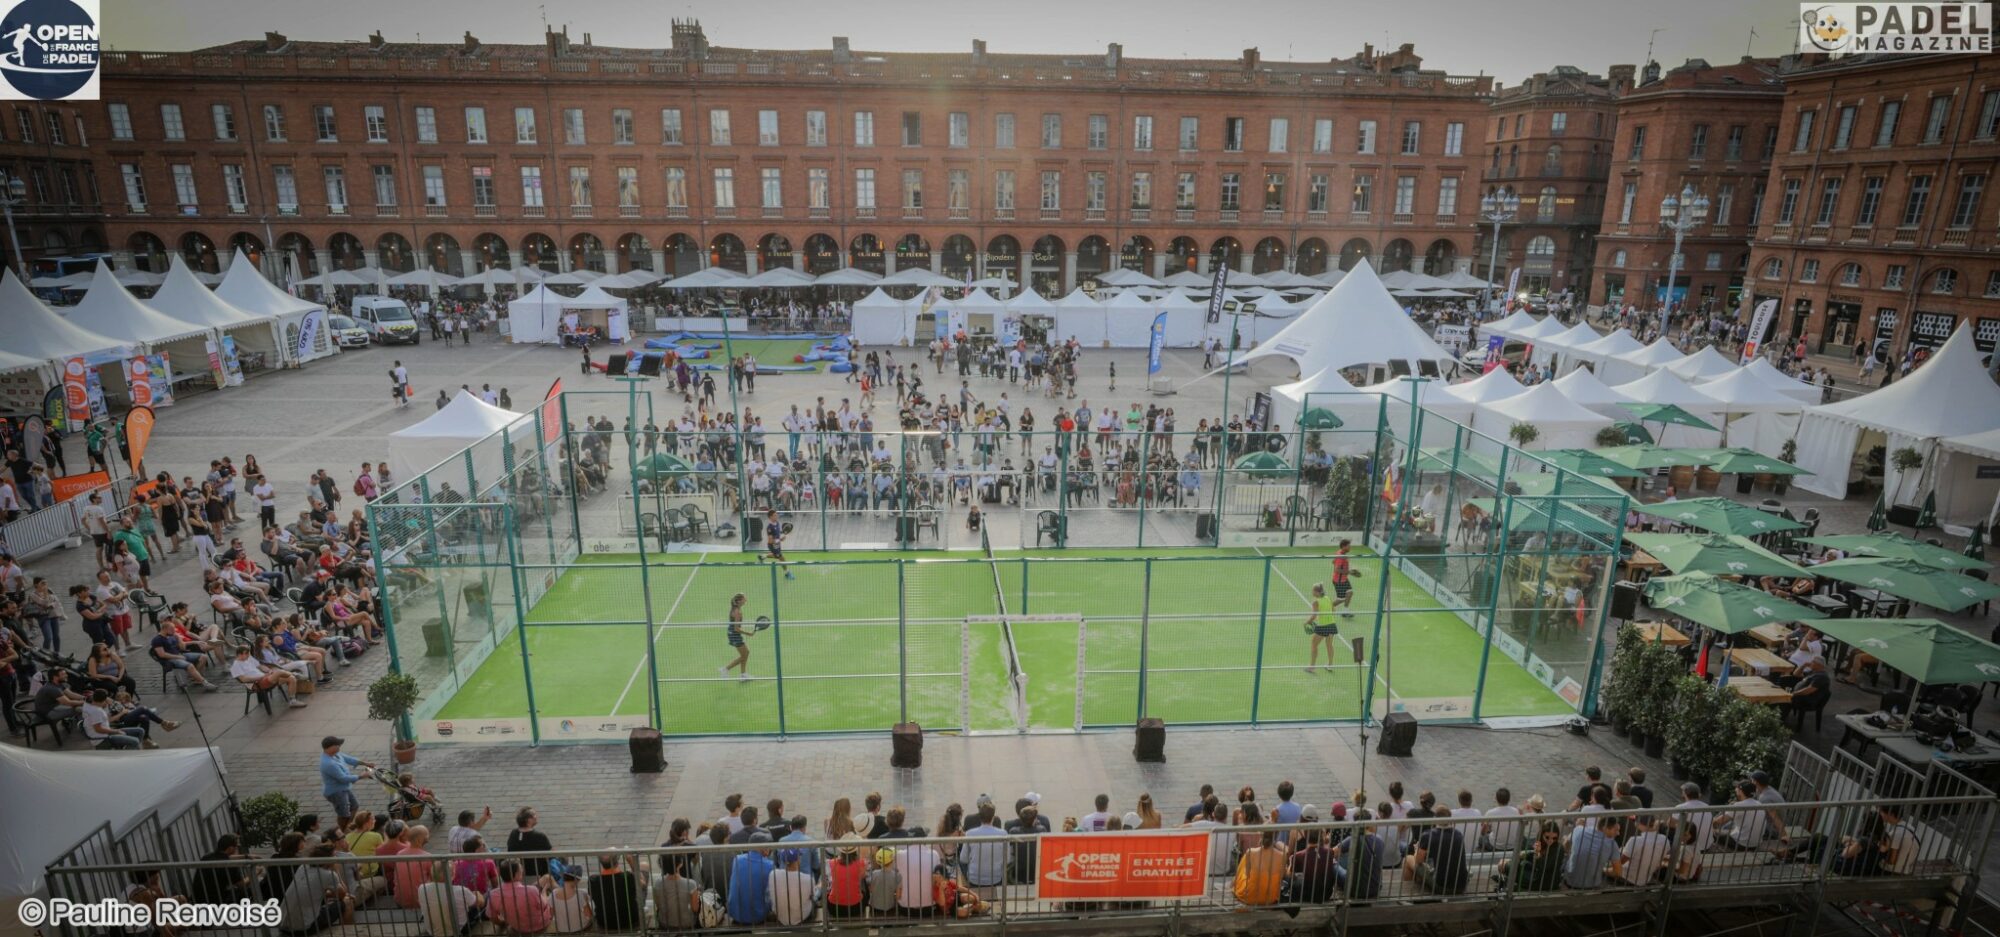 An Open from World Padel Tour in Toulouse in 2022?